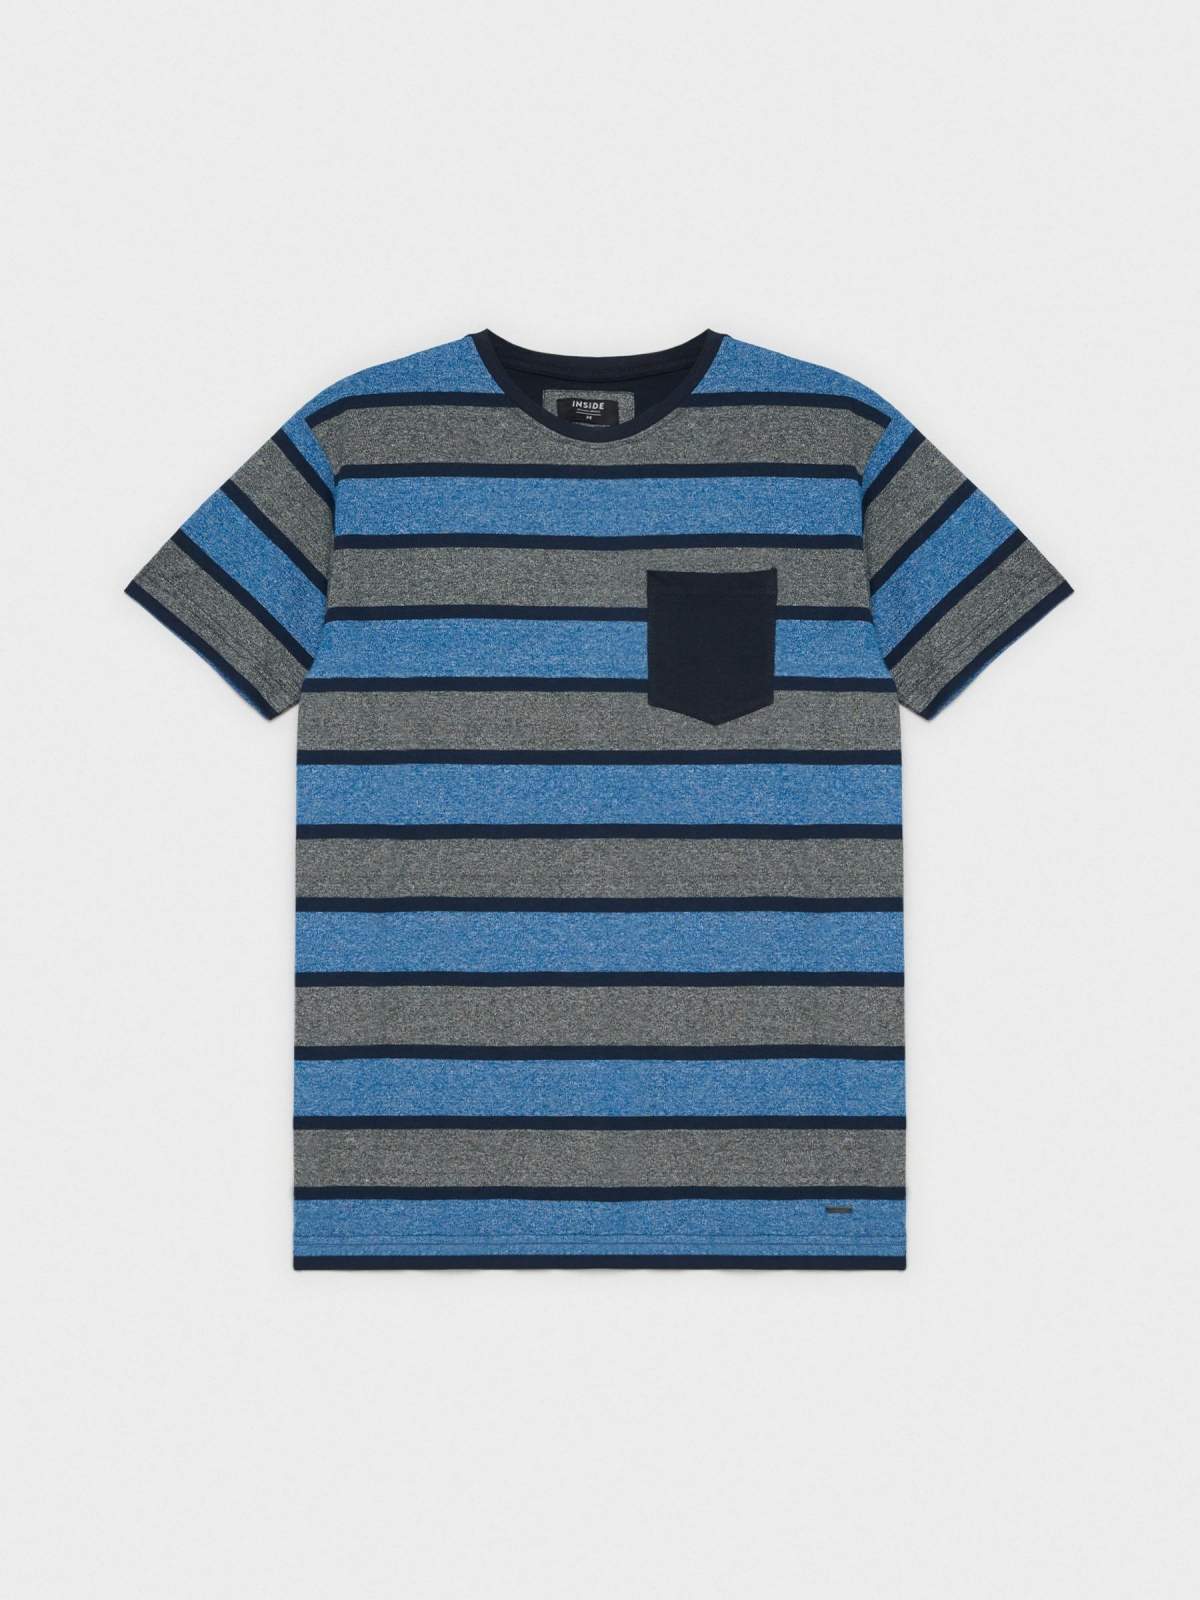  Striped T-shirt with pocket navy